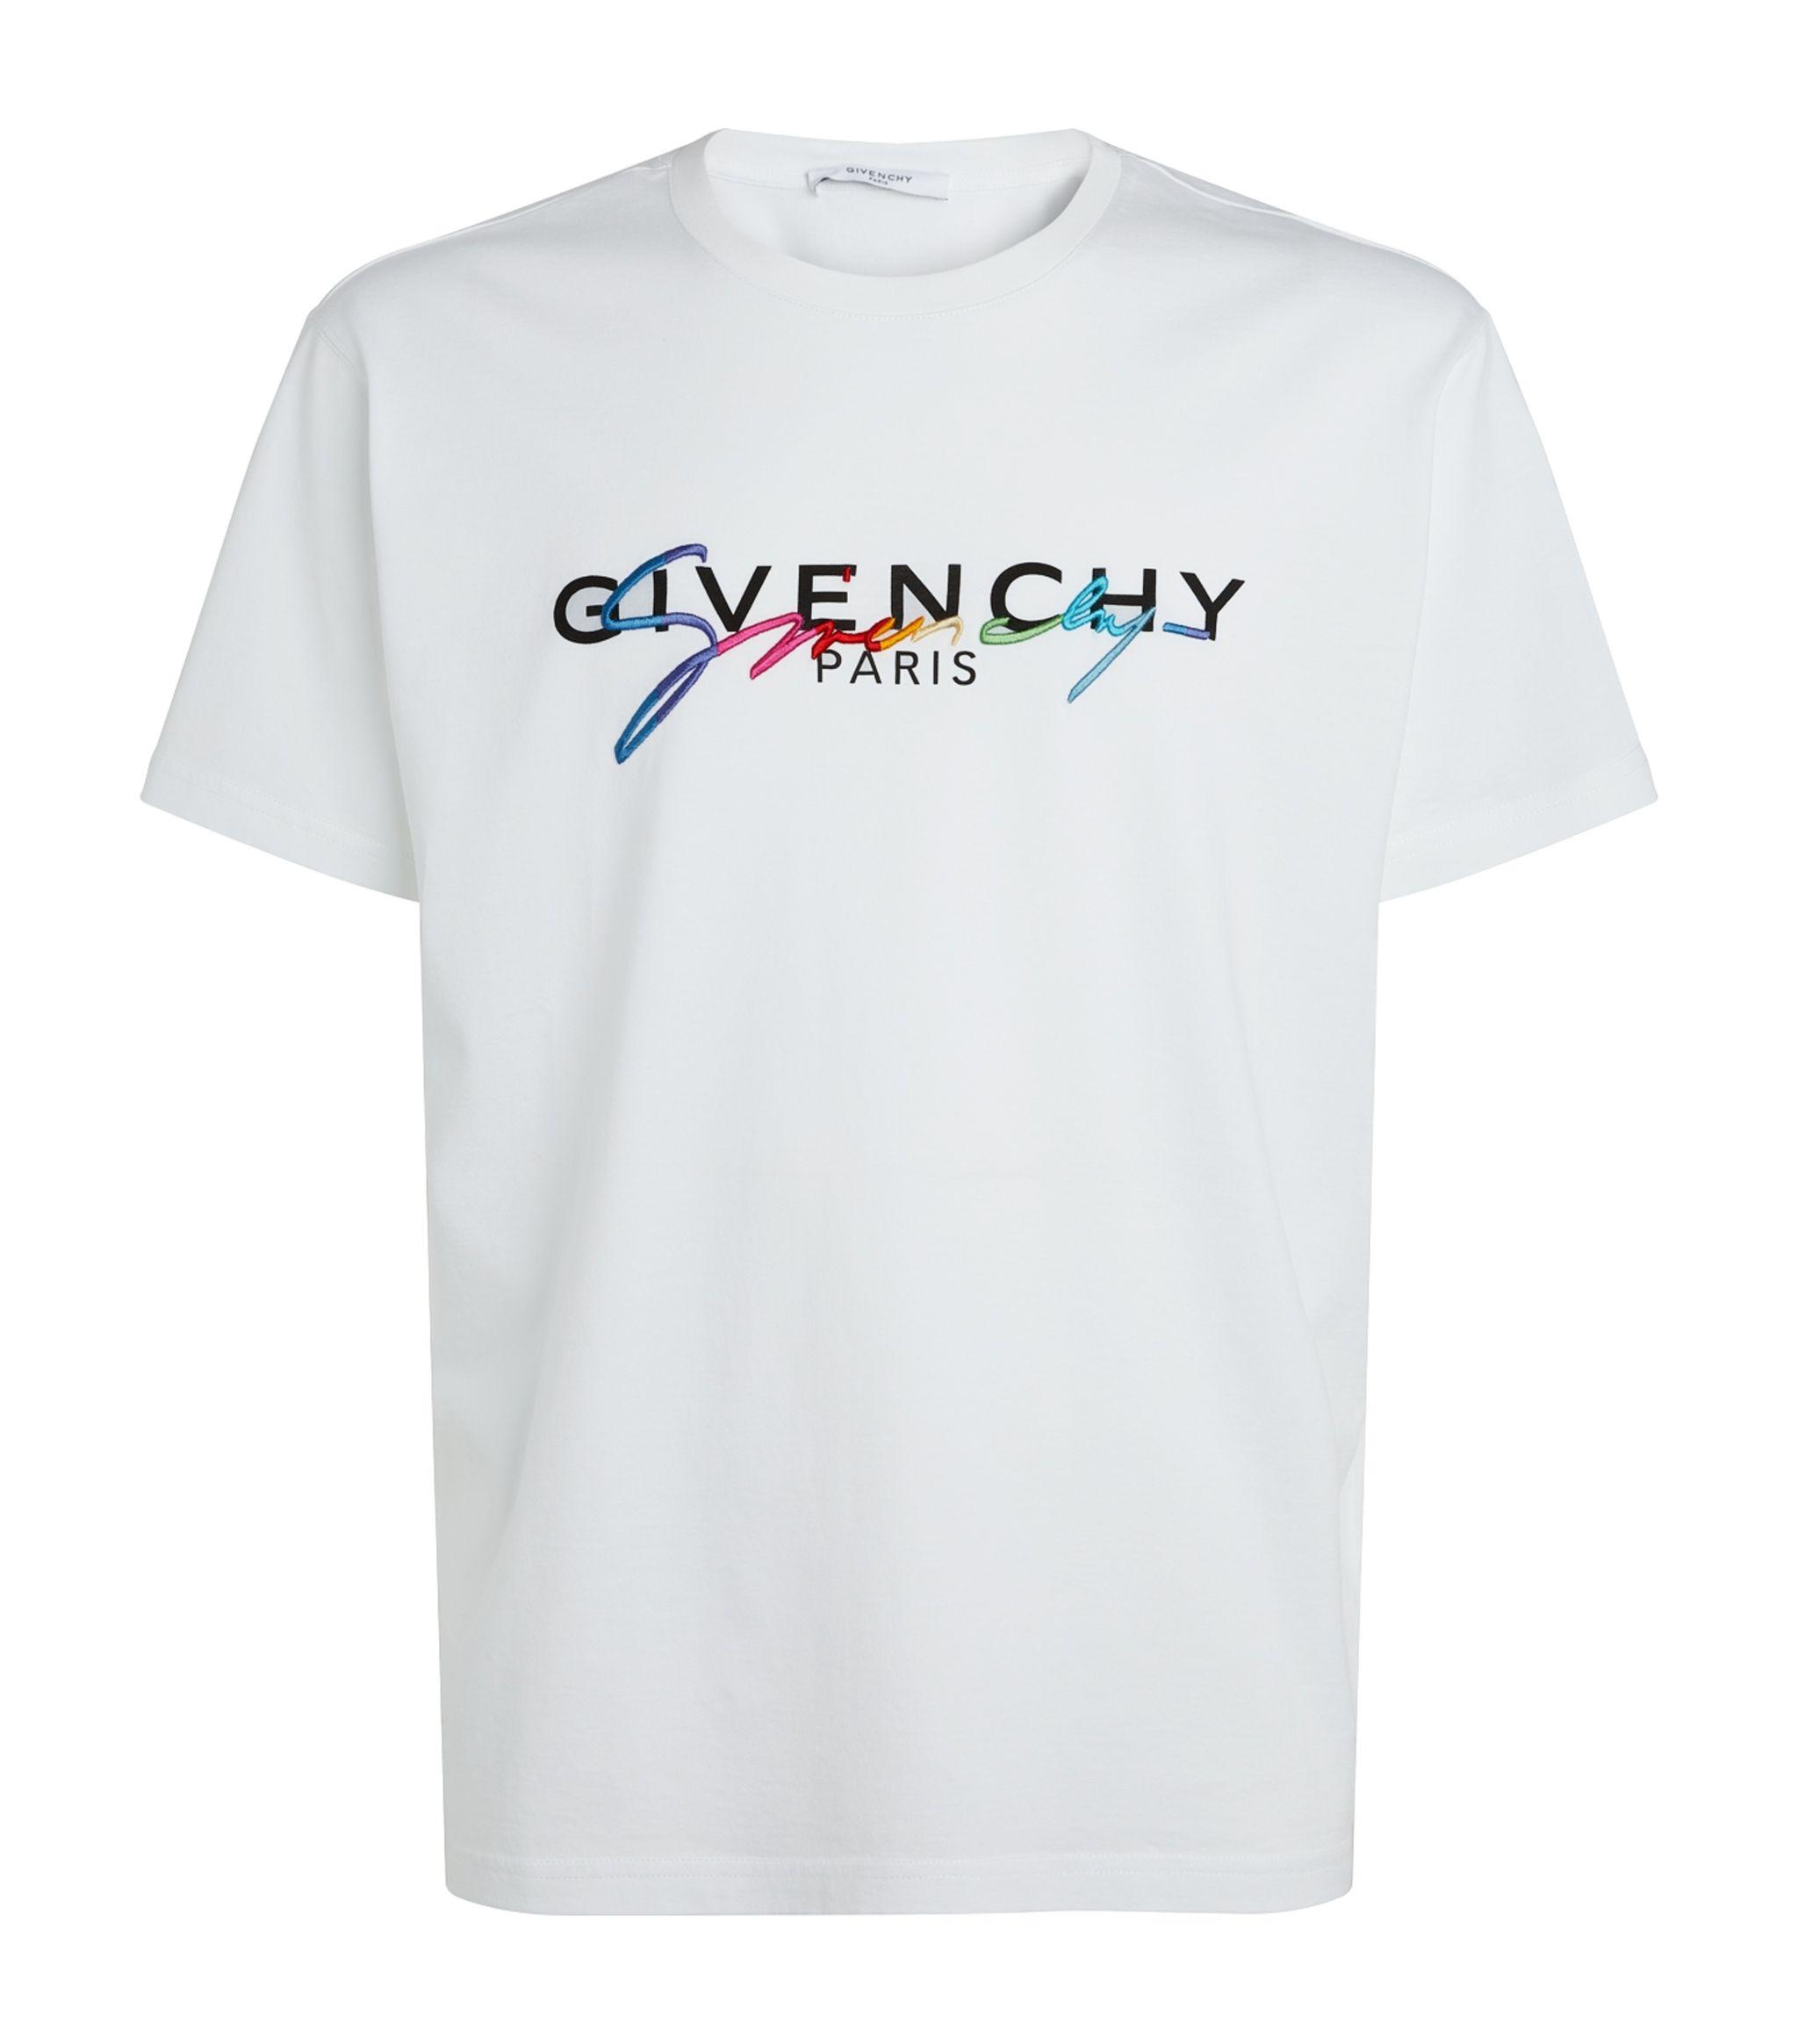 Givenchy Cotton Rainbow Signature Logo T-shirt in White for Men - Lyst